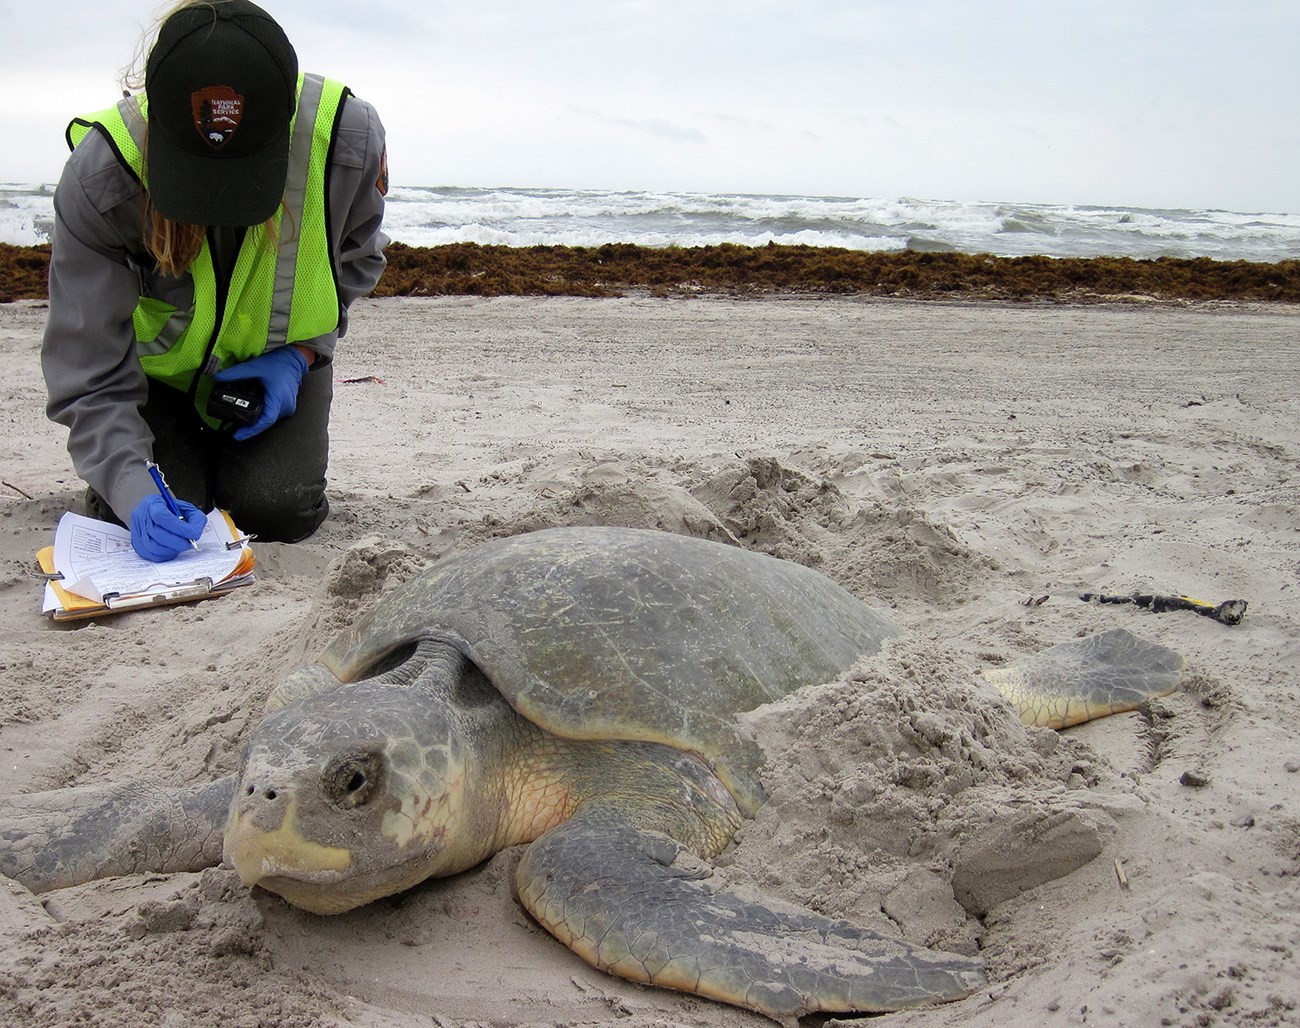 Wildlife biologist Donna Shaver with nesting Kemp's ridley sea turtle